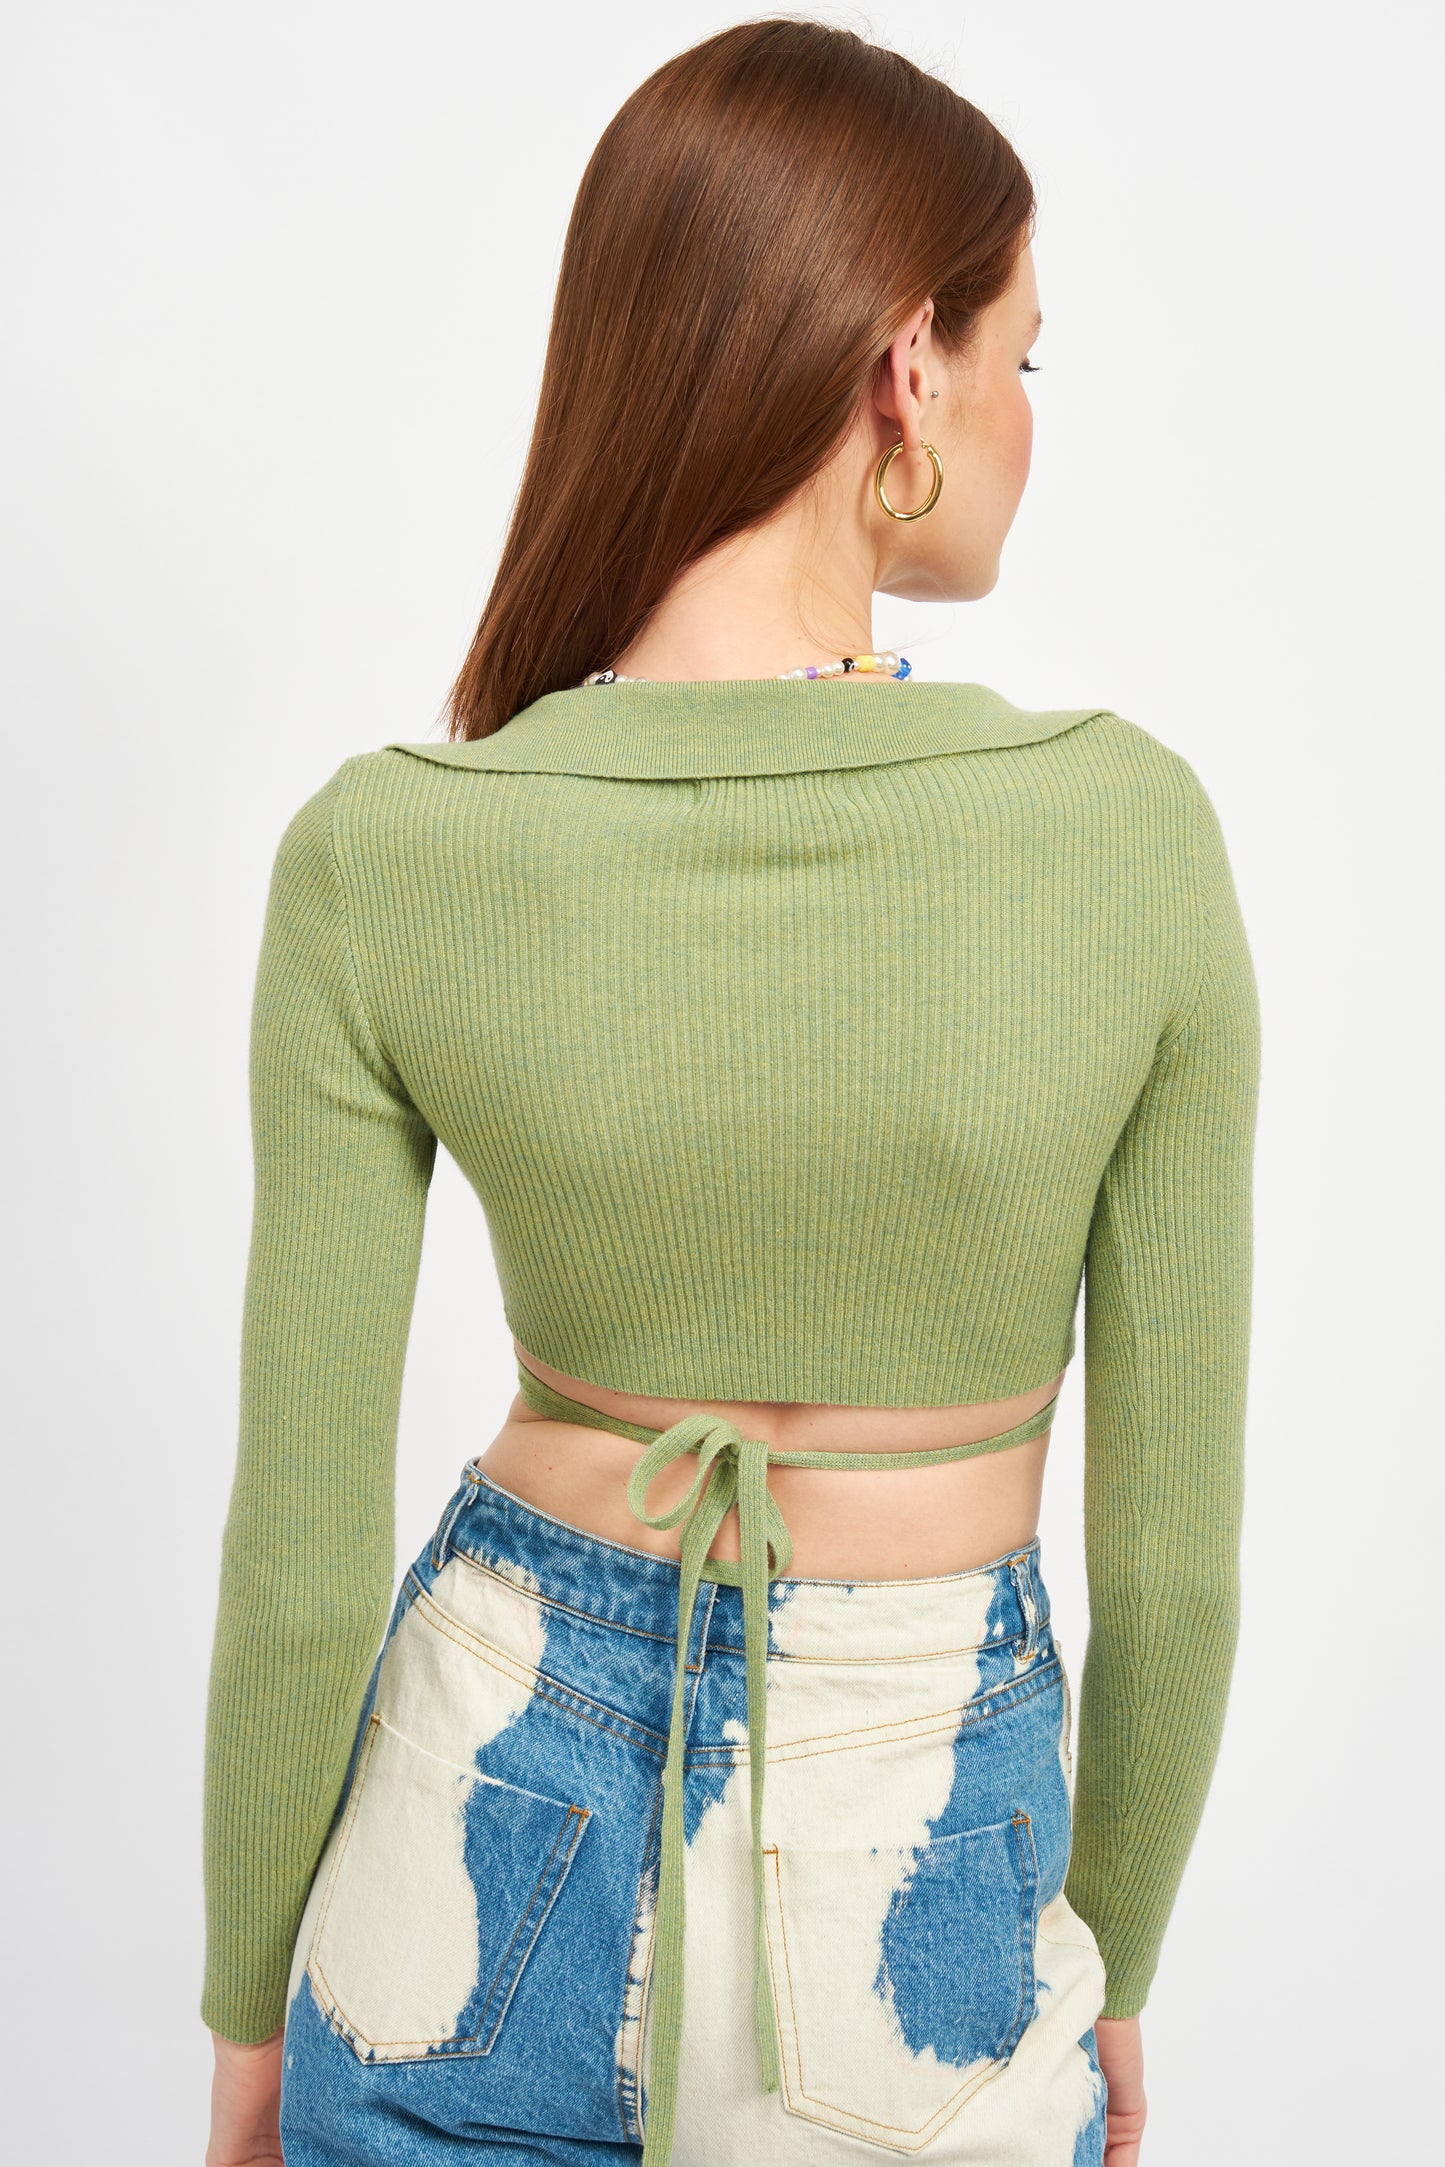 Finley Long Sleeve Wrapped Crop Top